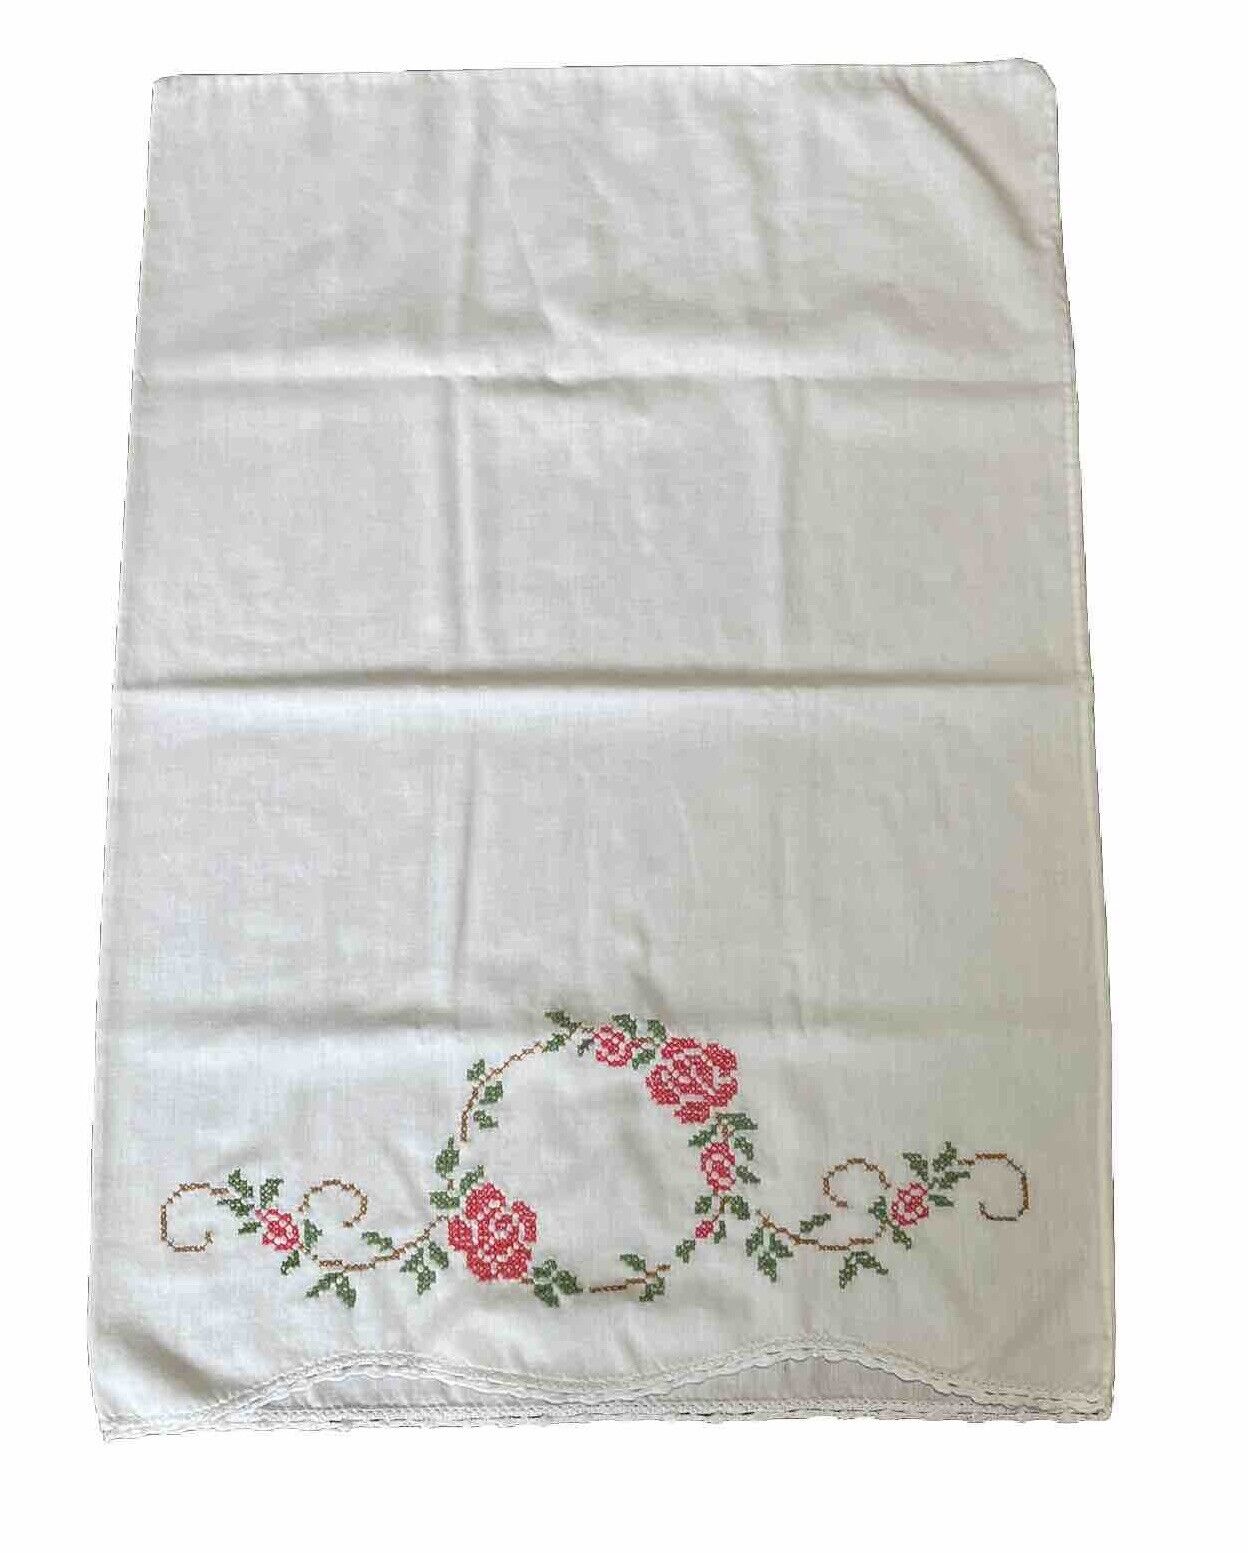 Vintage Hand Embroidered Pink Roses Grannycore Standard Pillow Case Crochet Edge